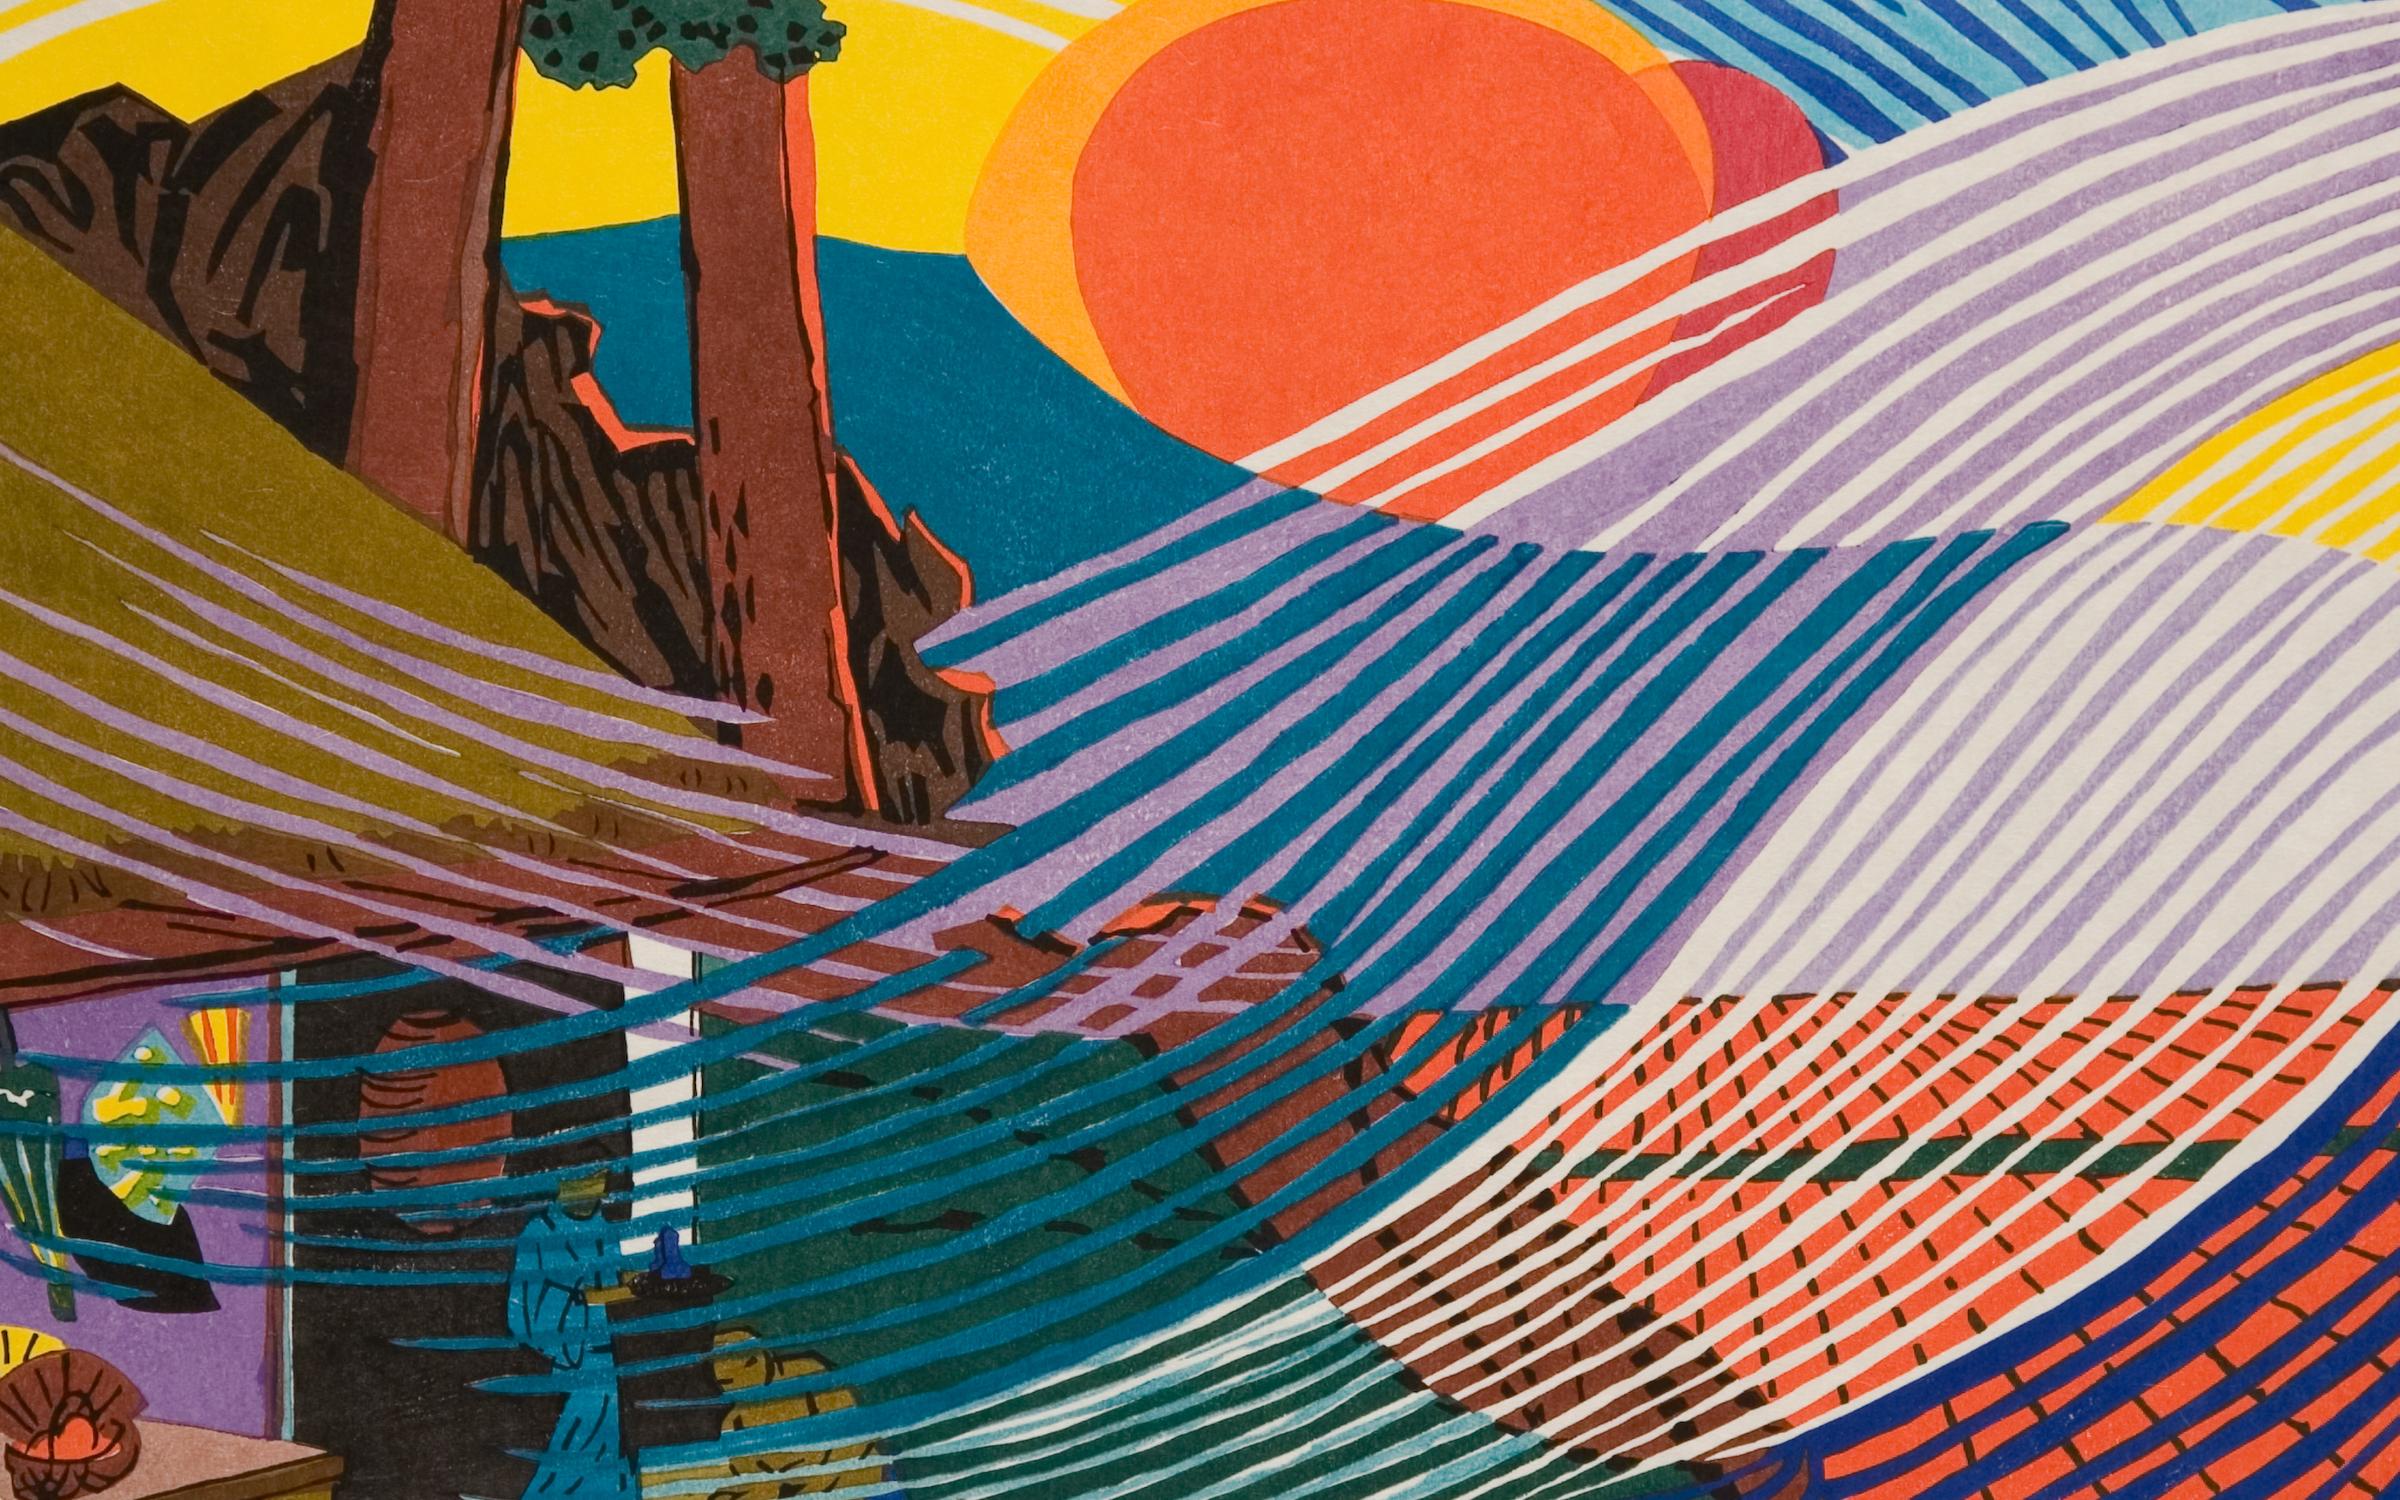 A wood cut print depicting wind through colorful lines over the top of trees, buildings, and a bright orange sun.